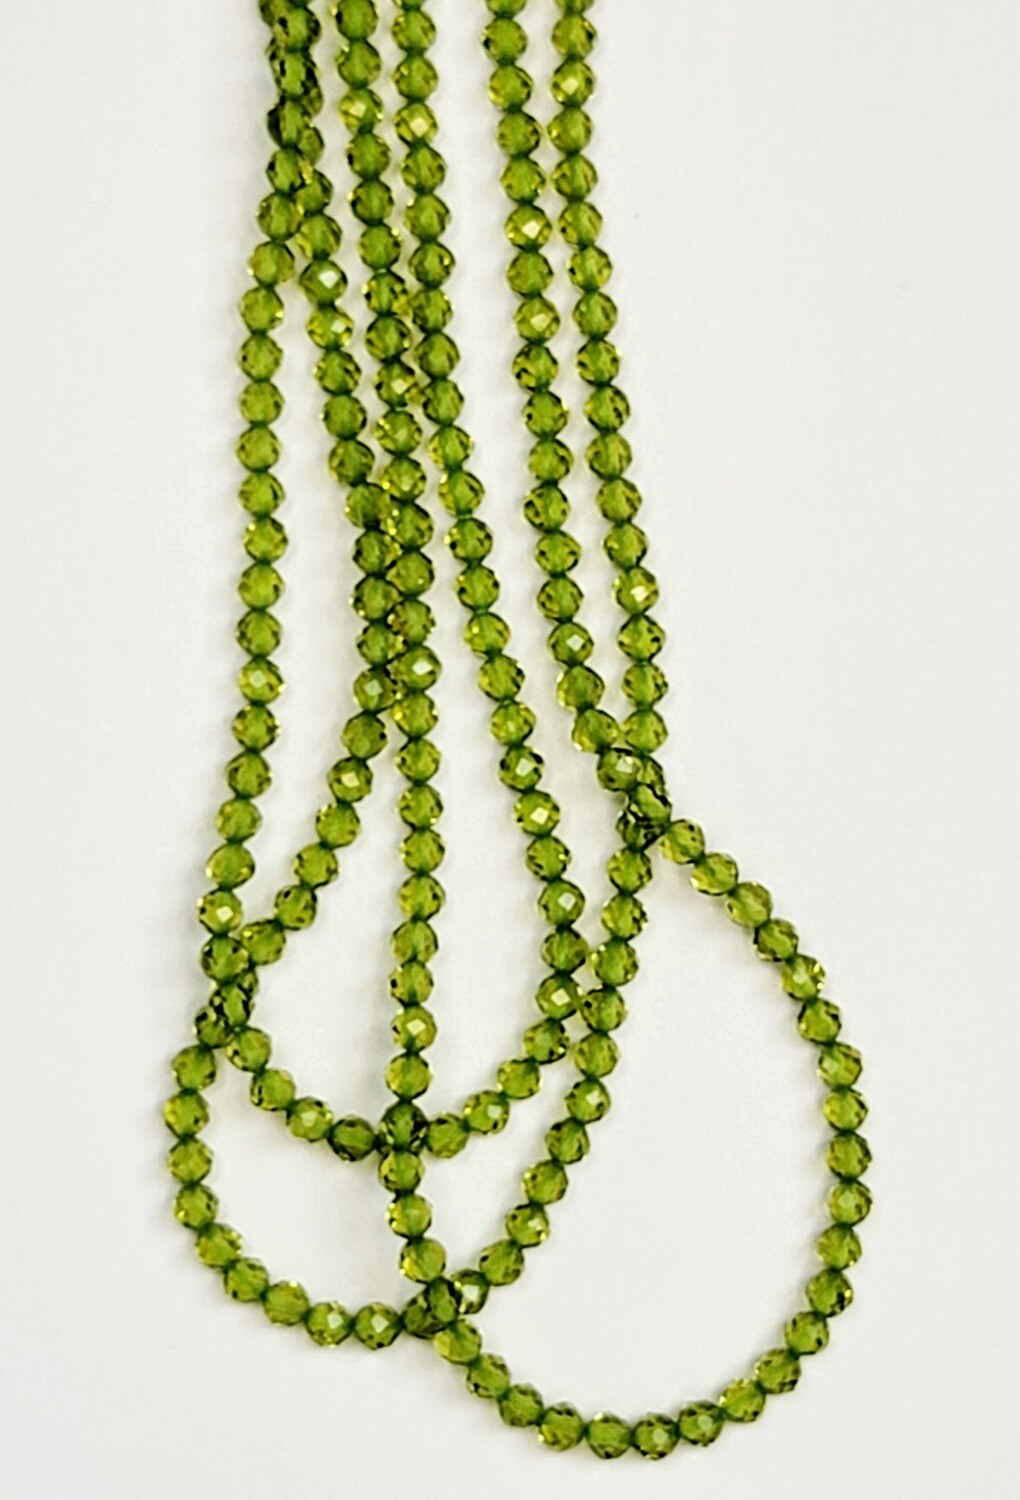 2mm Micro Faceted Round Crystal Beads - Fern Green